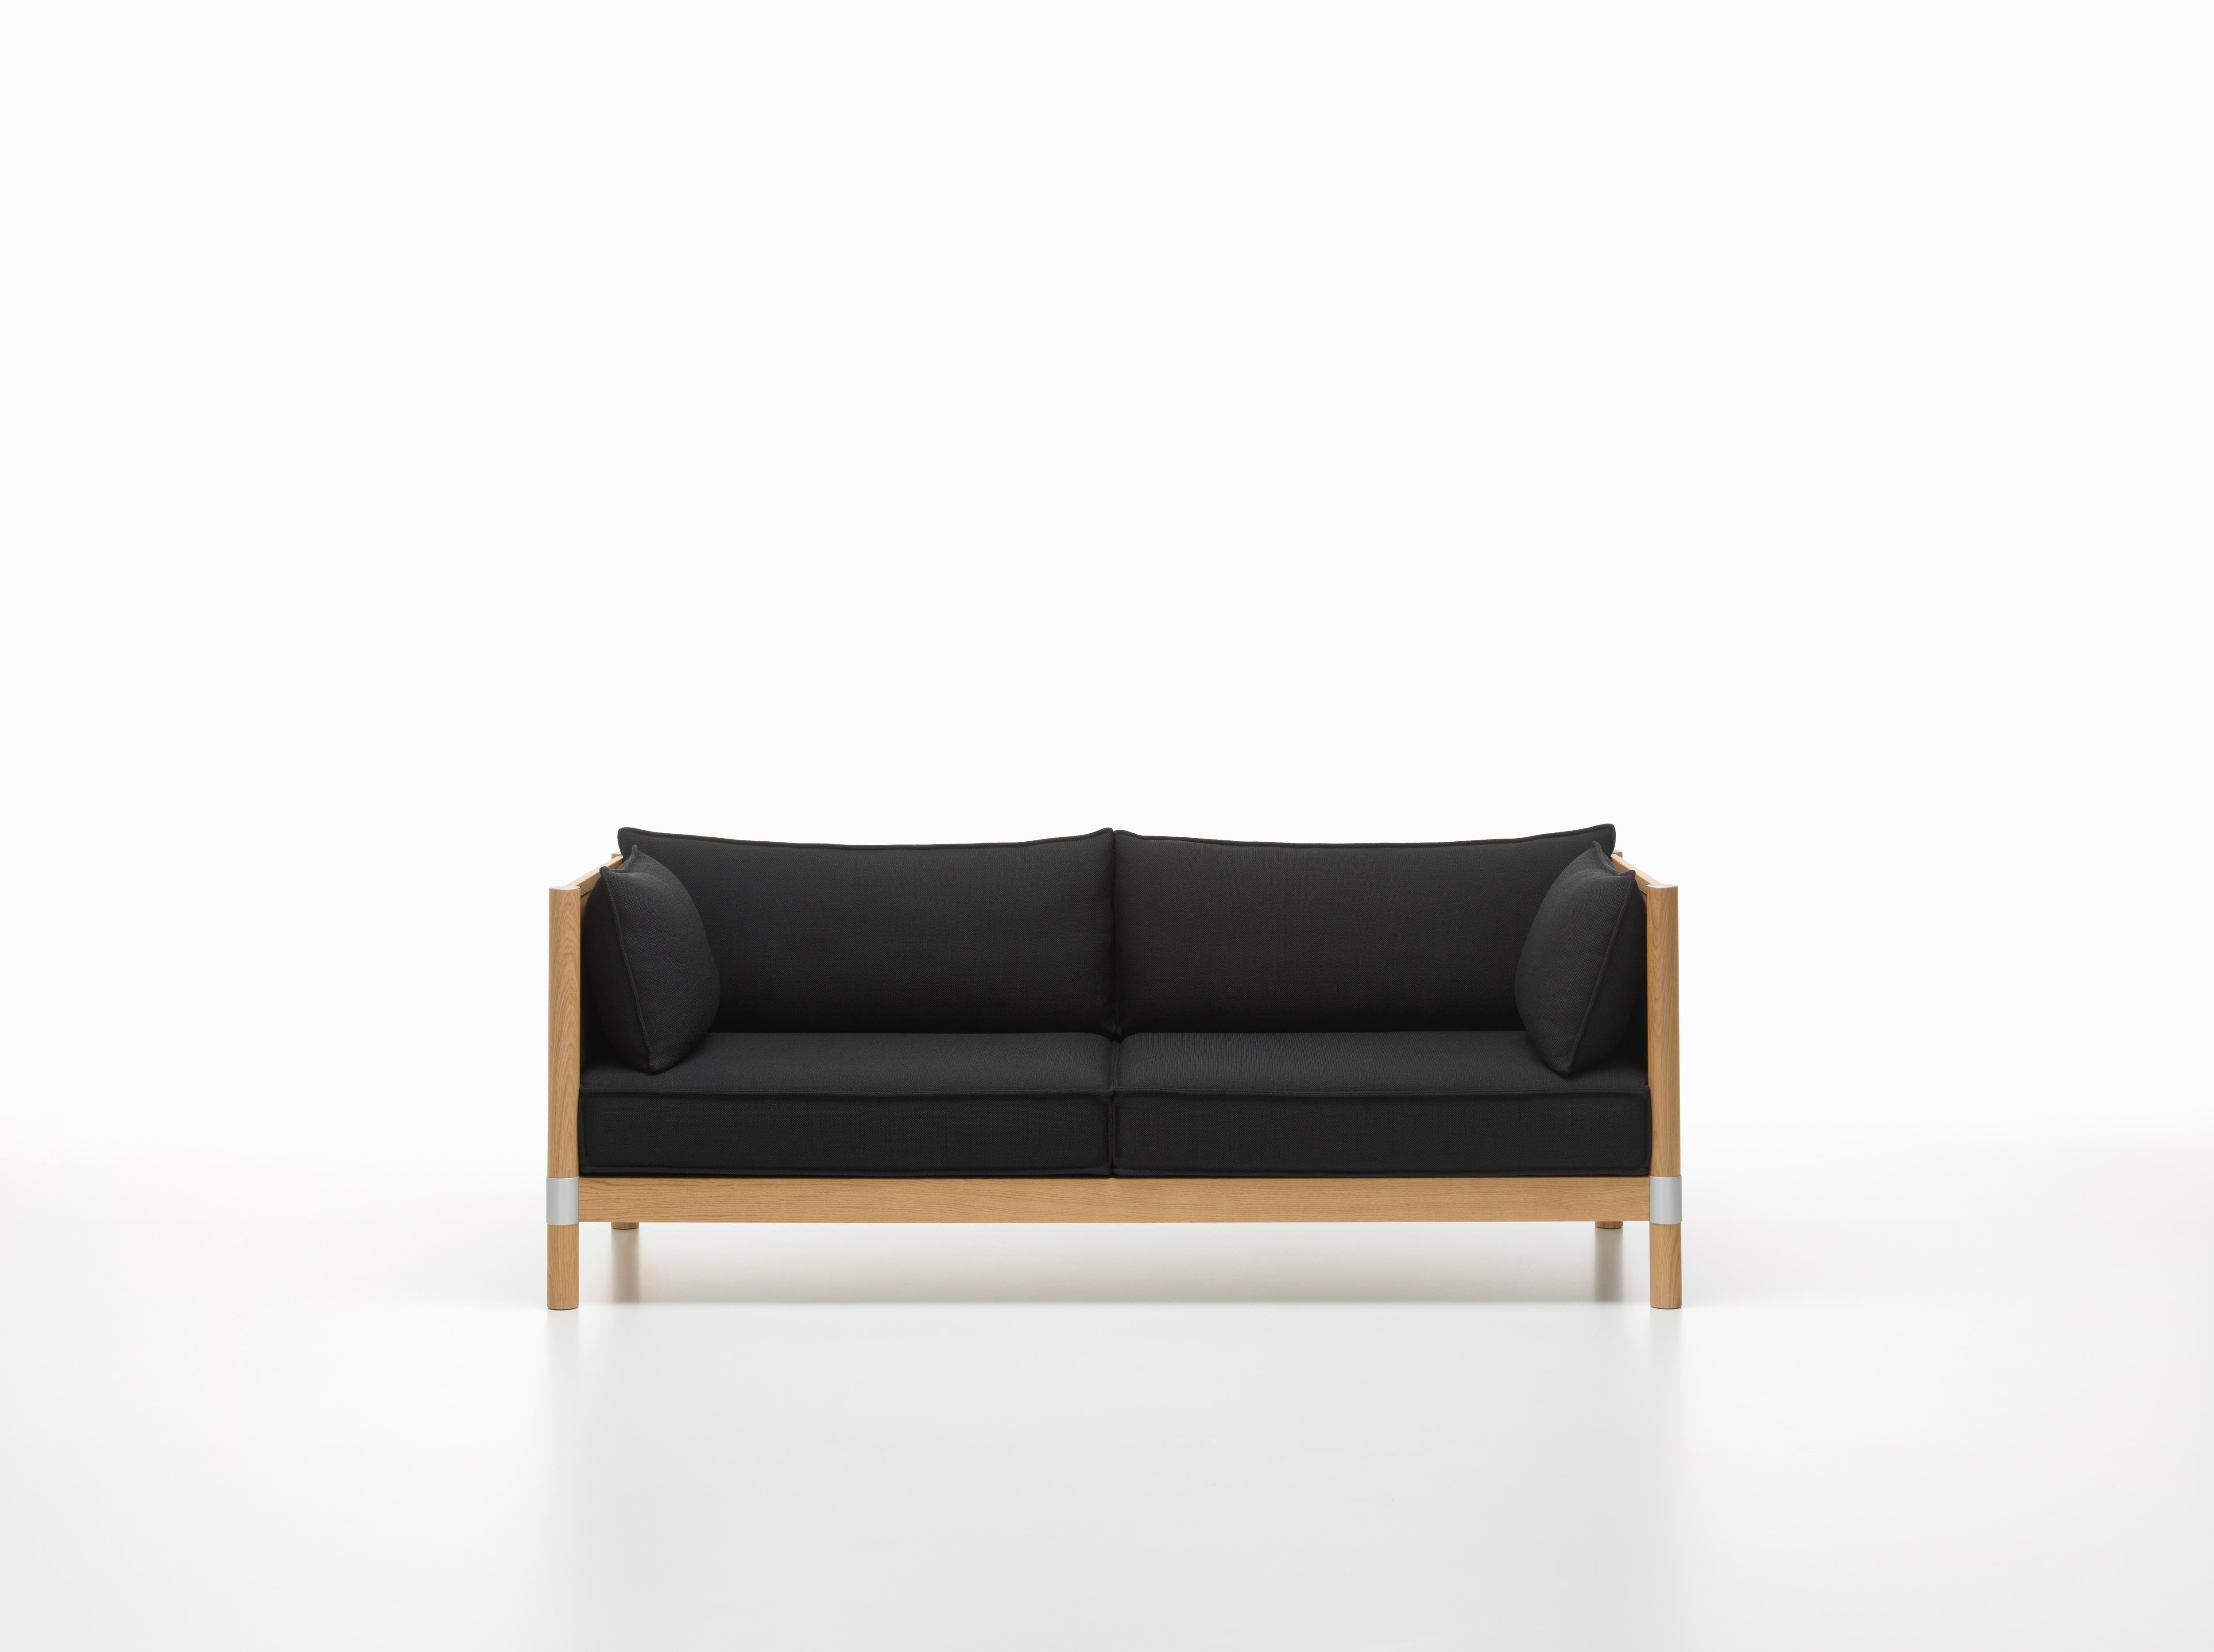 These products are only available in the United States.

The clean-lined aesthetic of Cyl sofa, with its smooth planes, orthogonal frame and cylindrical supports, is emphasized by components made of solid wood. This makes it an ideal piece for